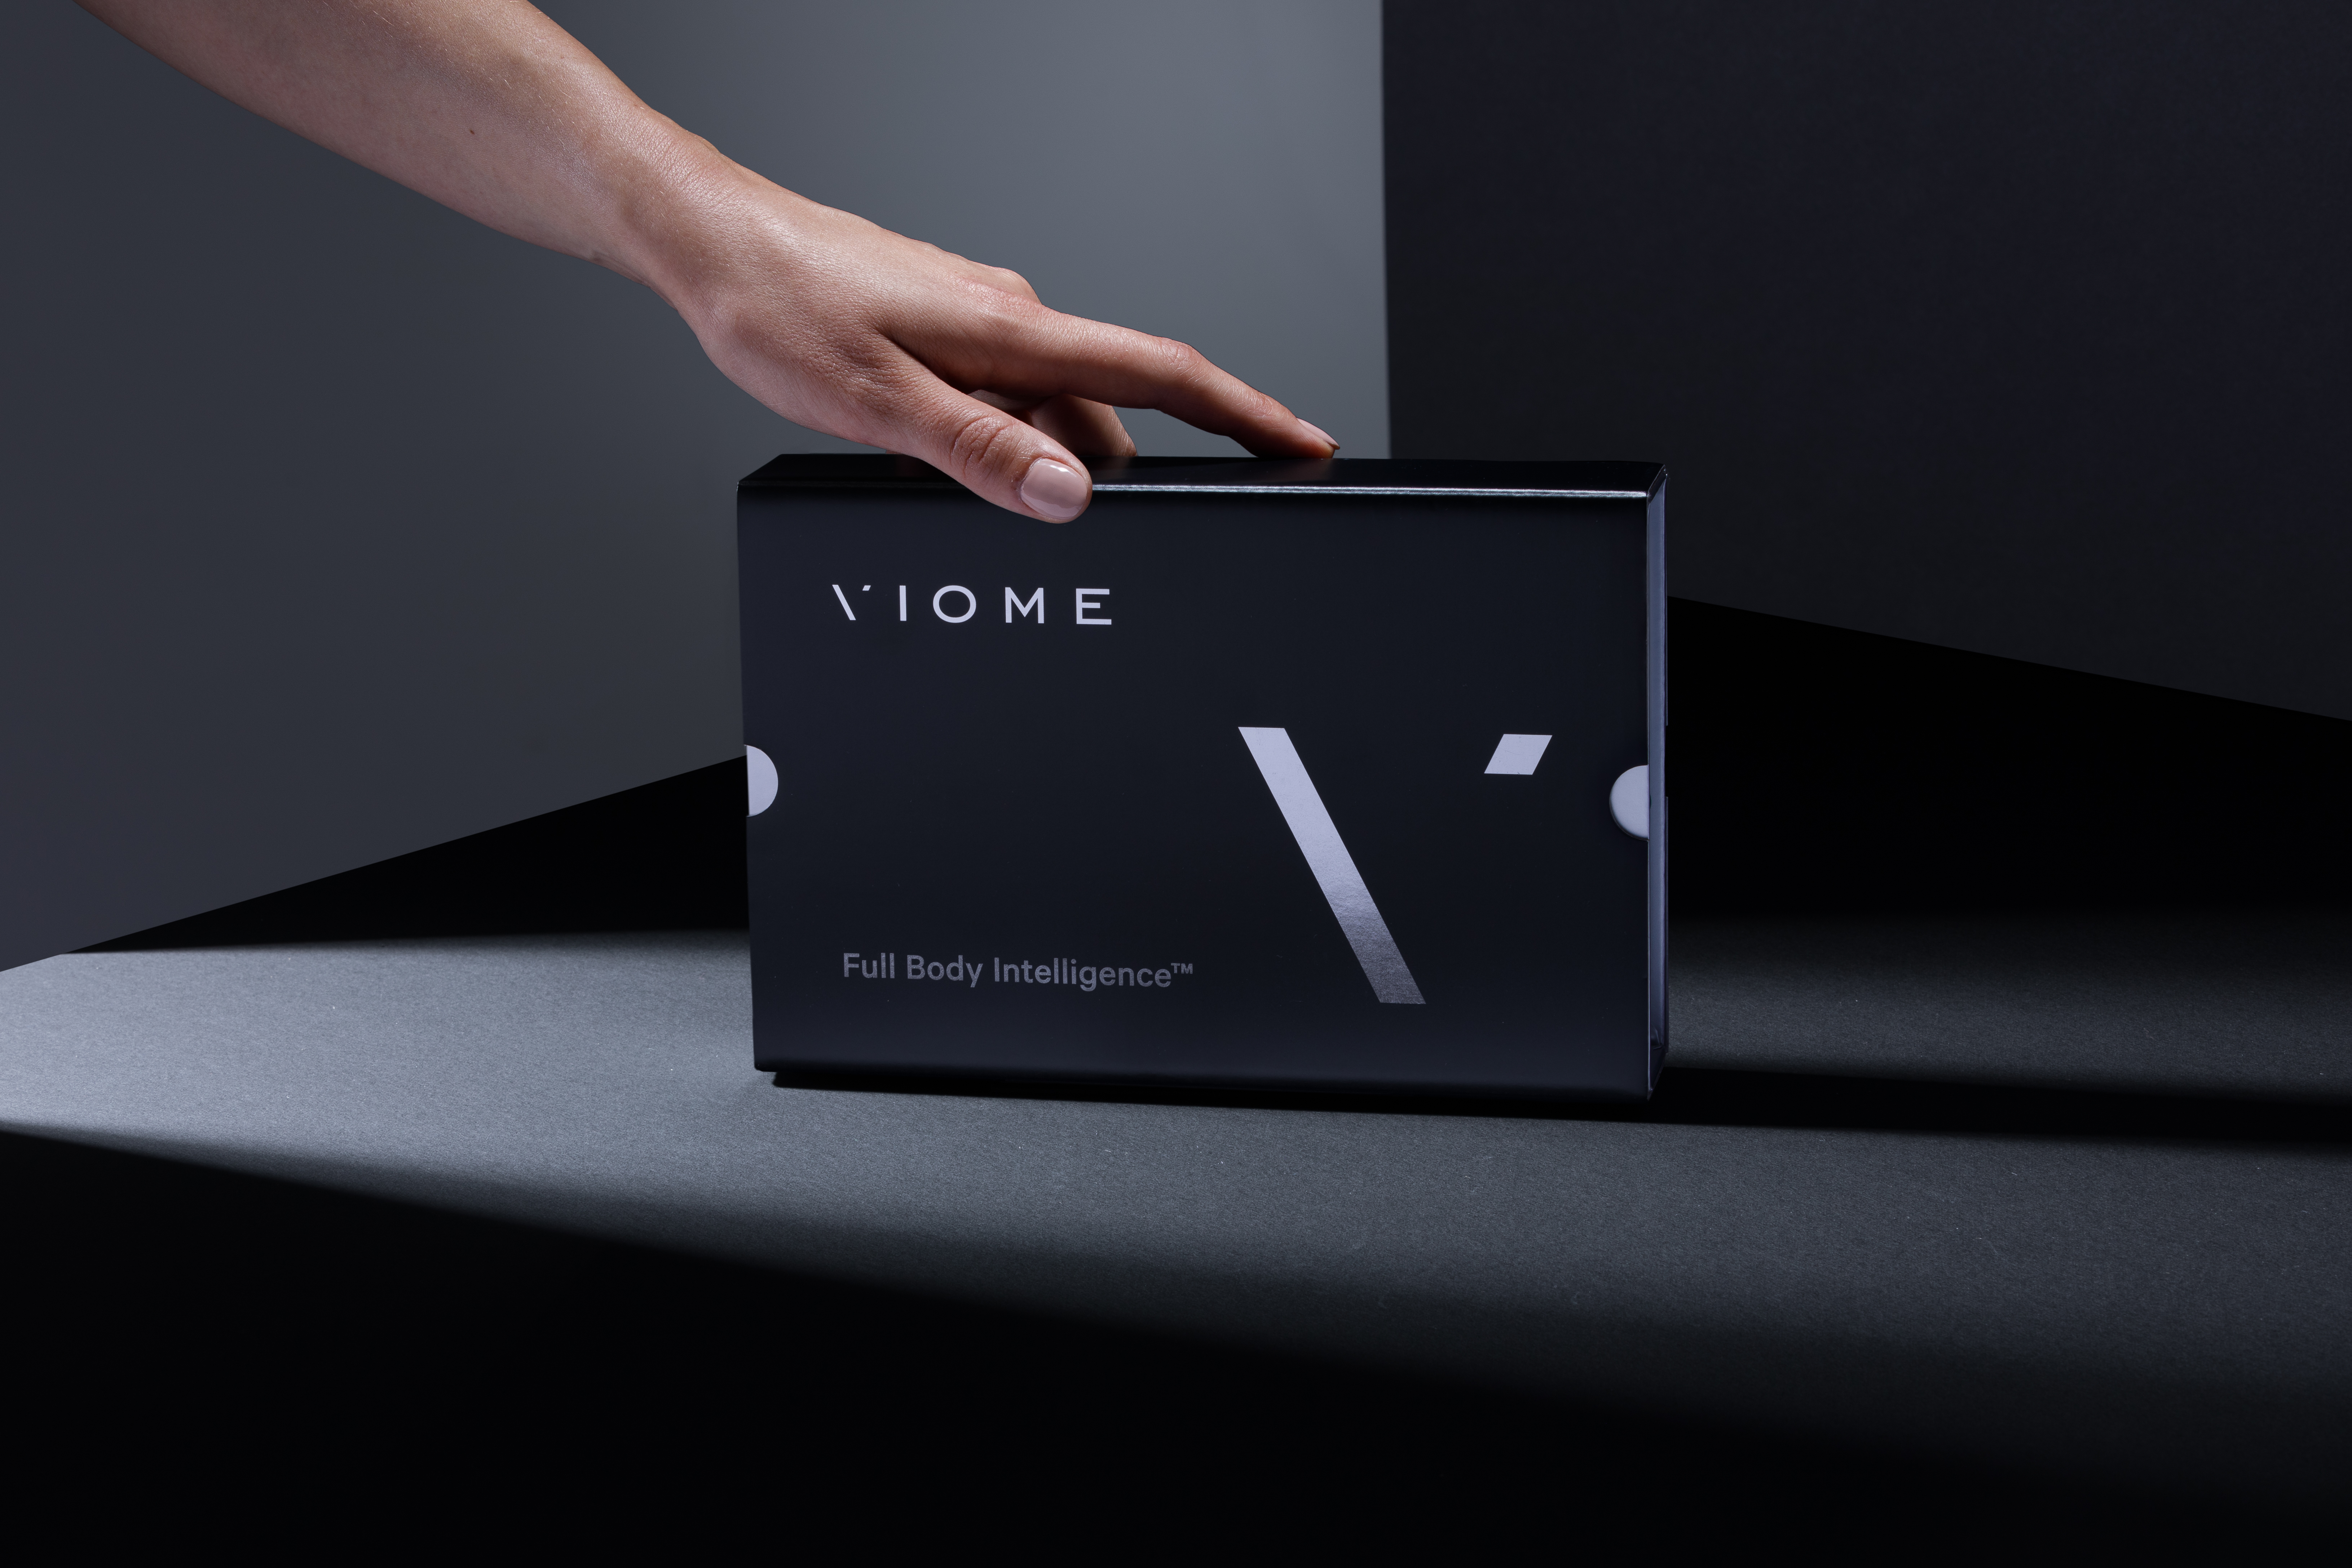 Viome Life Sciences Launches The World's Most Advanced At-home Health Test